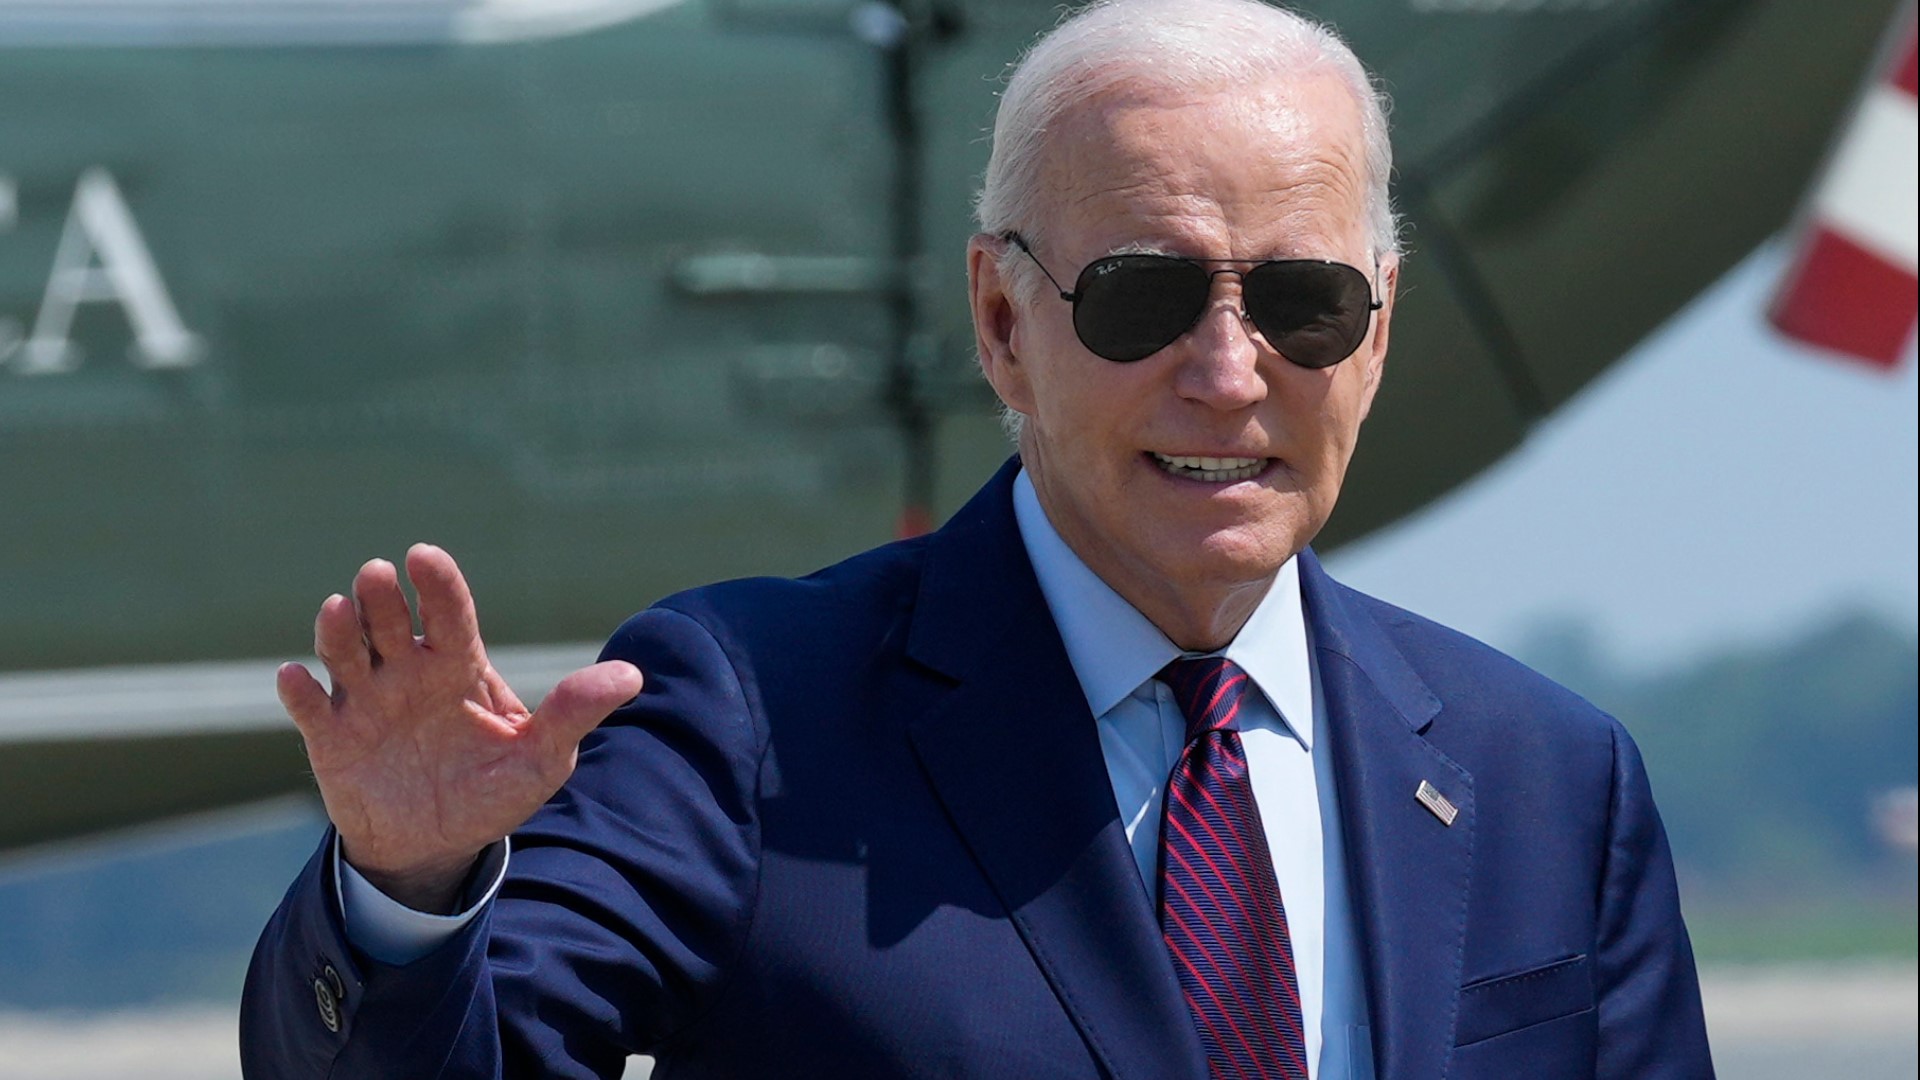 Biden pointed to inflation statistics that showed the U.S. has the lowest rate of price increases among the world's biggest economies.